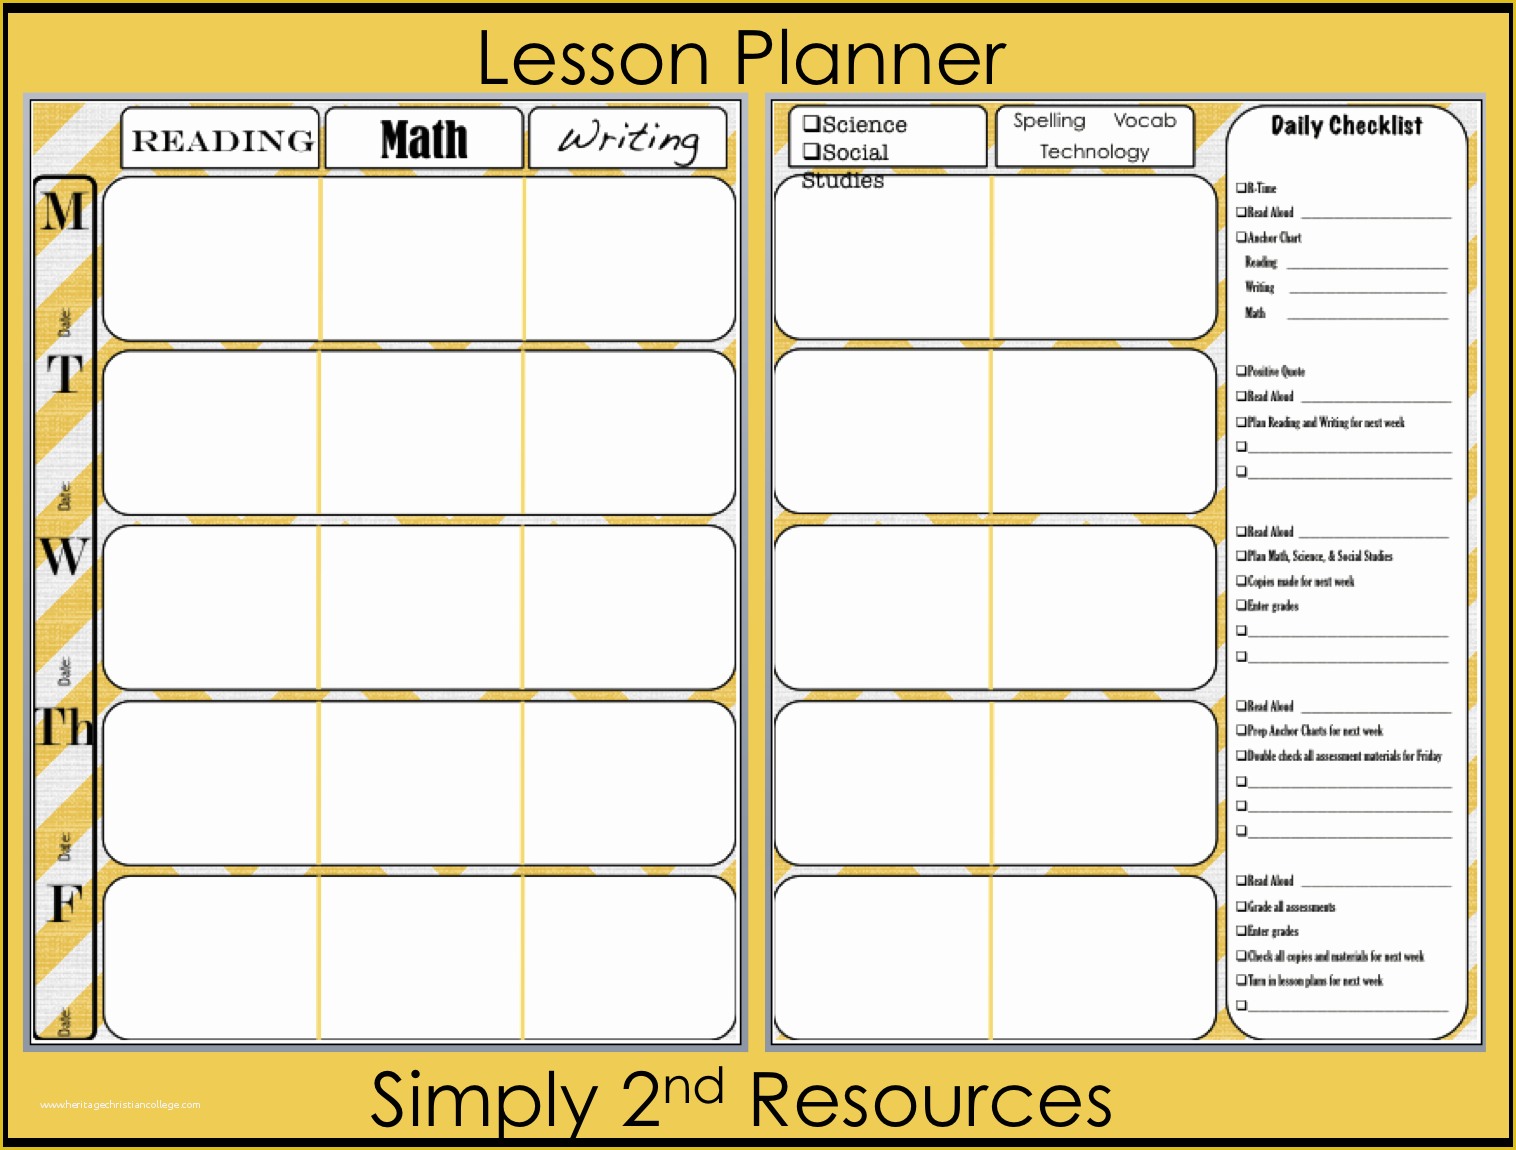 Free Lesson Plan Templates Of Simply 2nd Resources Lesson Plan Template so Excited to